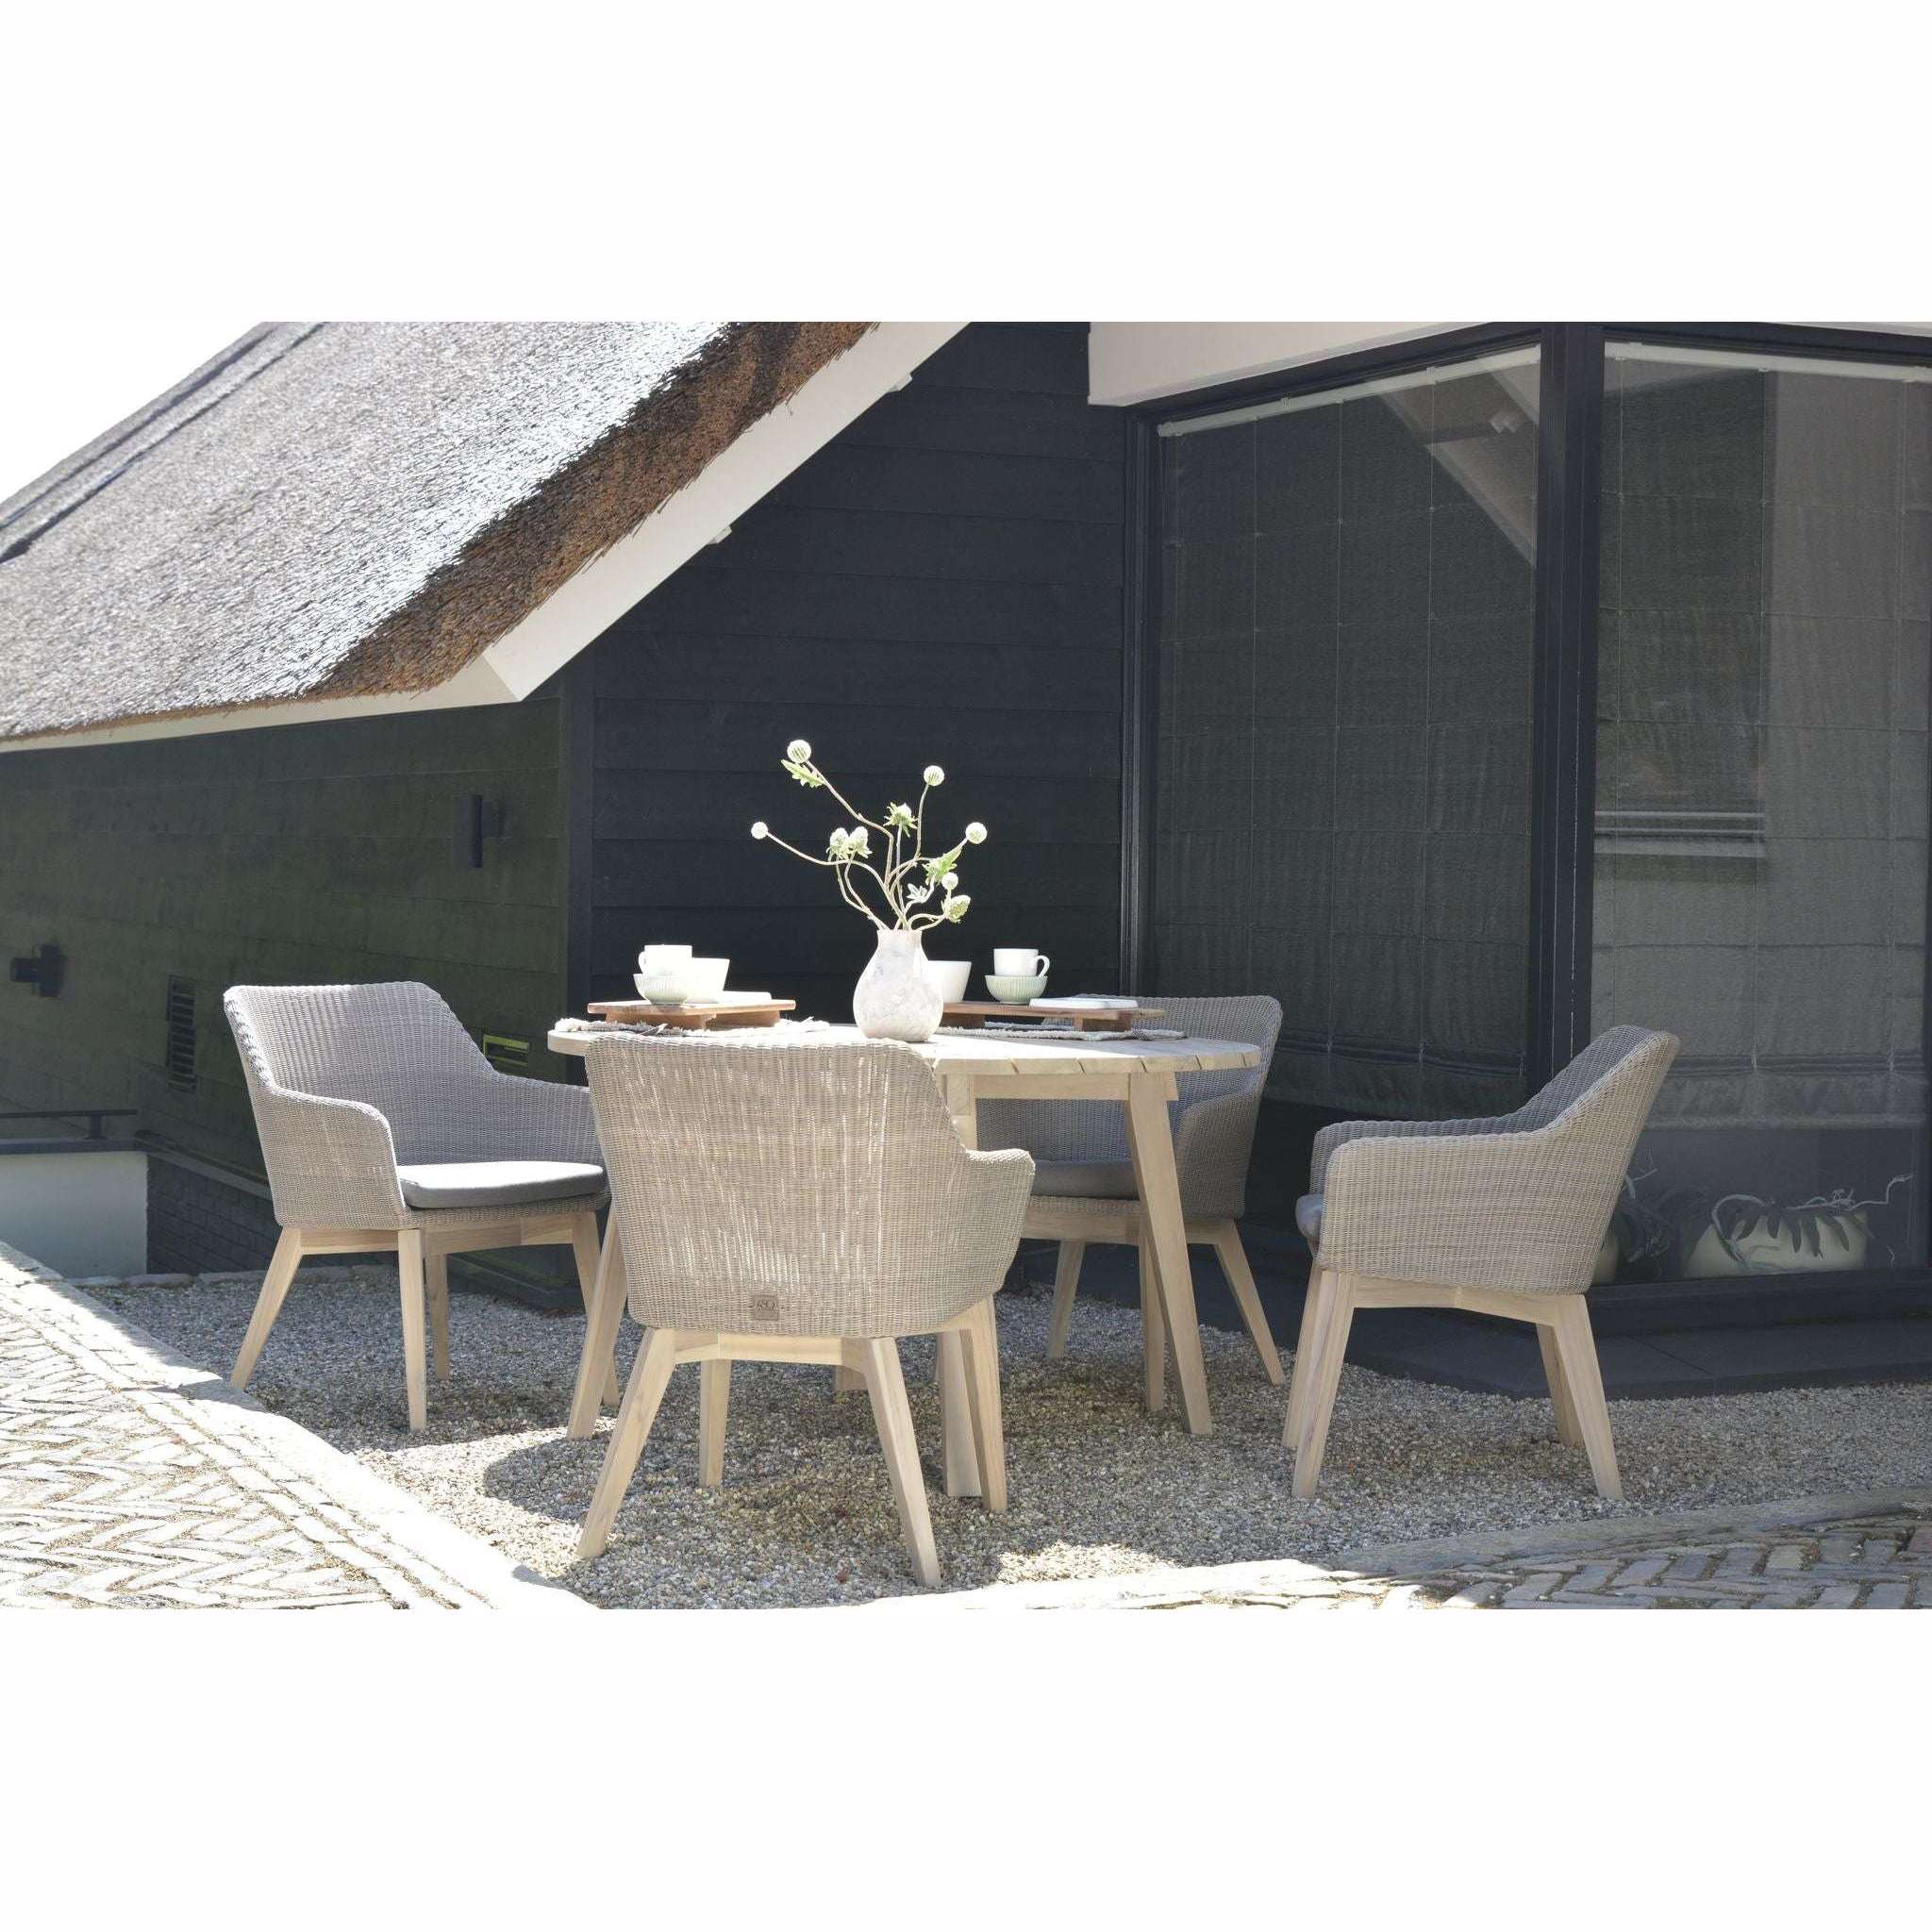 Exceptional Garden:4 Seasons Outdoor Avila 4 Seater dining set with 130cm Derby Teak Round Table